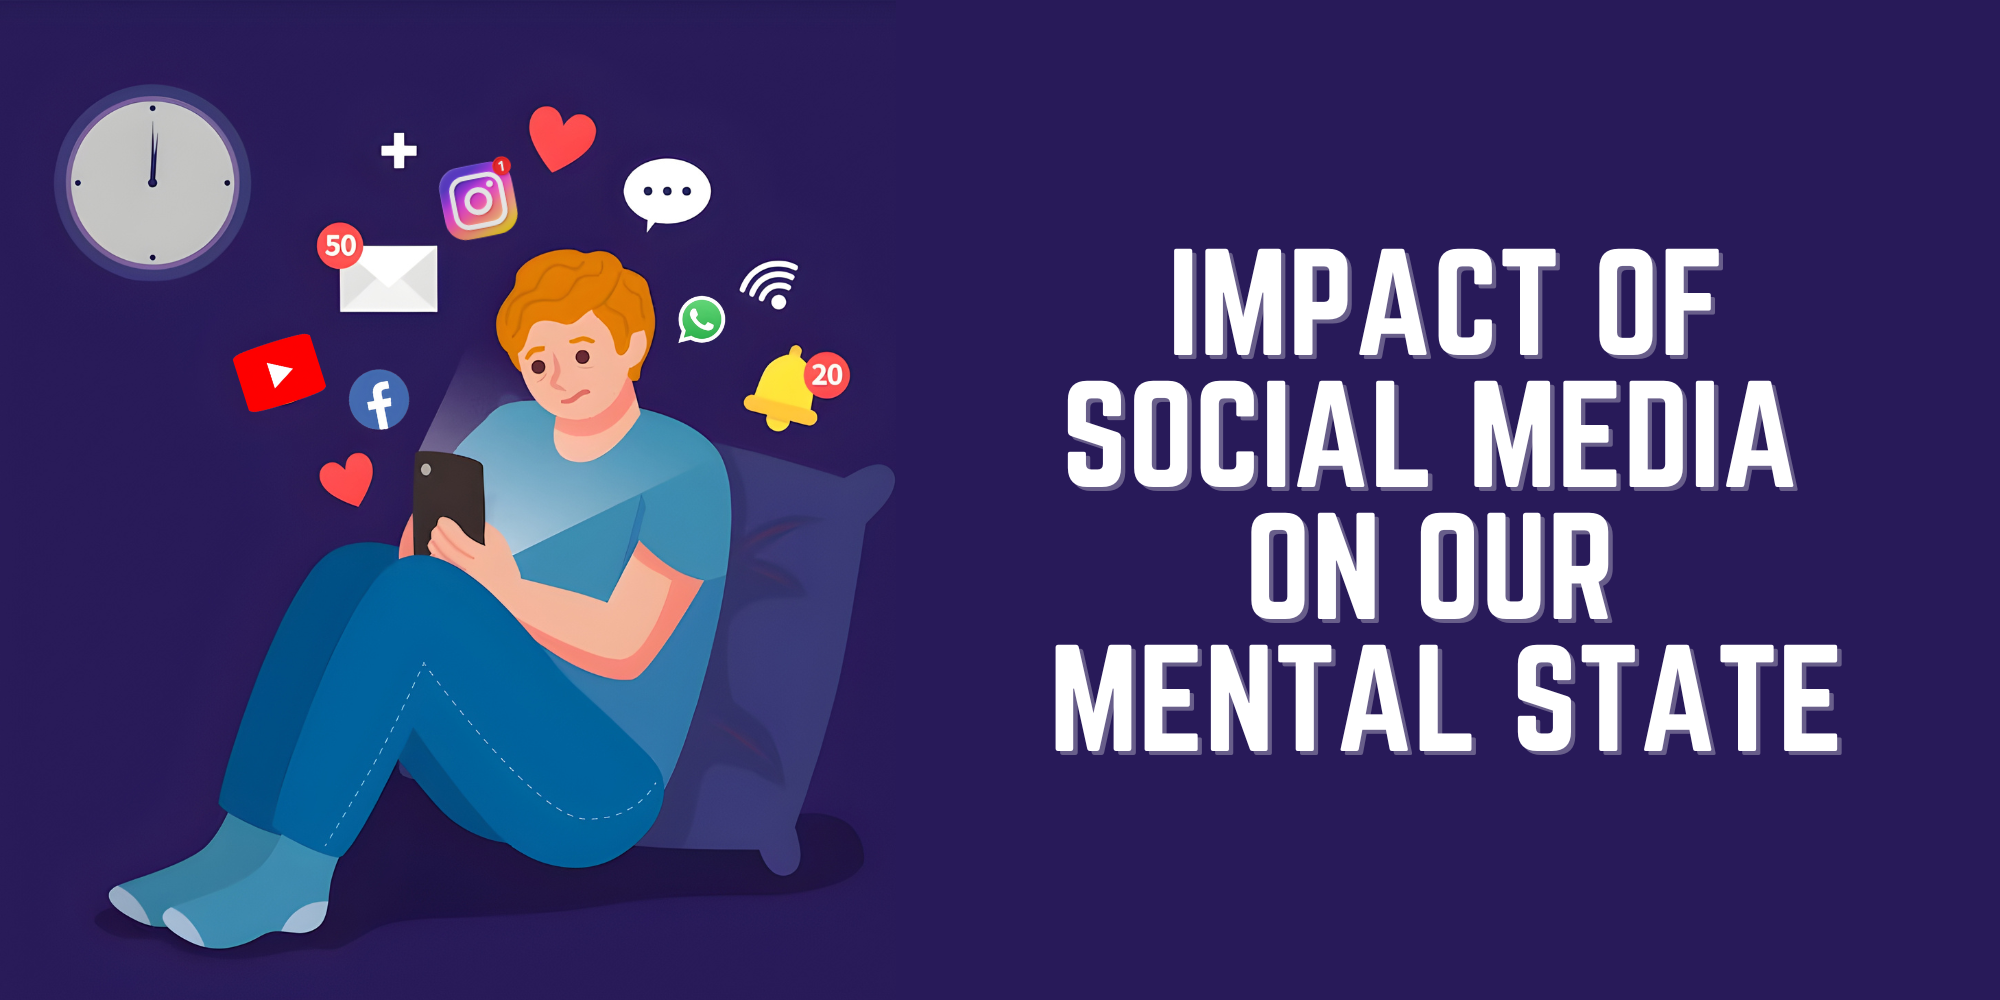 Hashtags and Heartaches: Social Media’s Influence on Mental Health